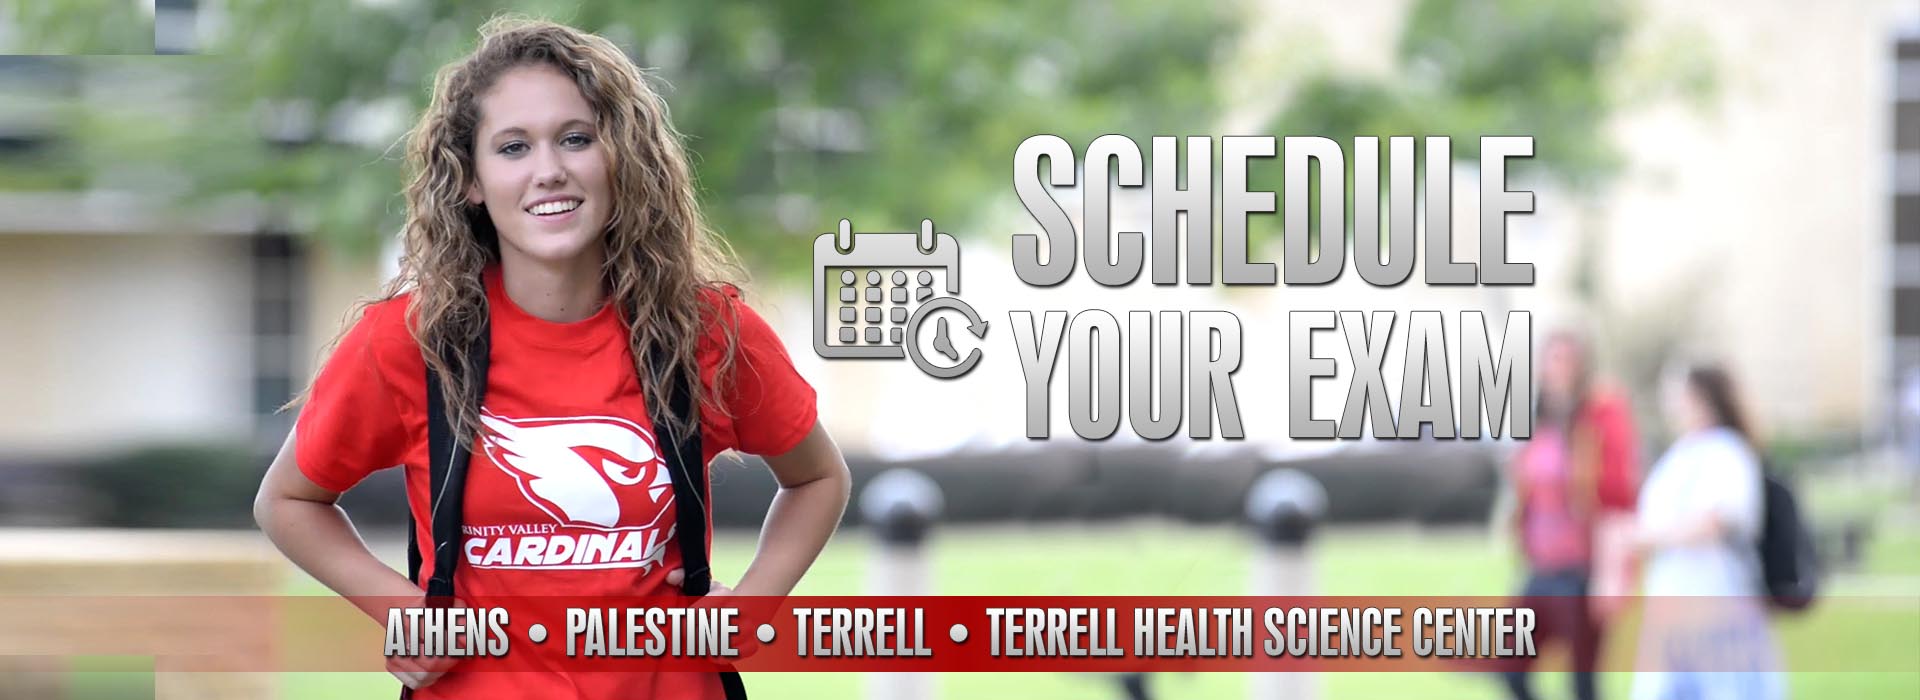 Schedule your exam in Athens, Palestine, Terrell or the Terrell Health Science Center